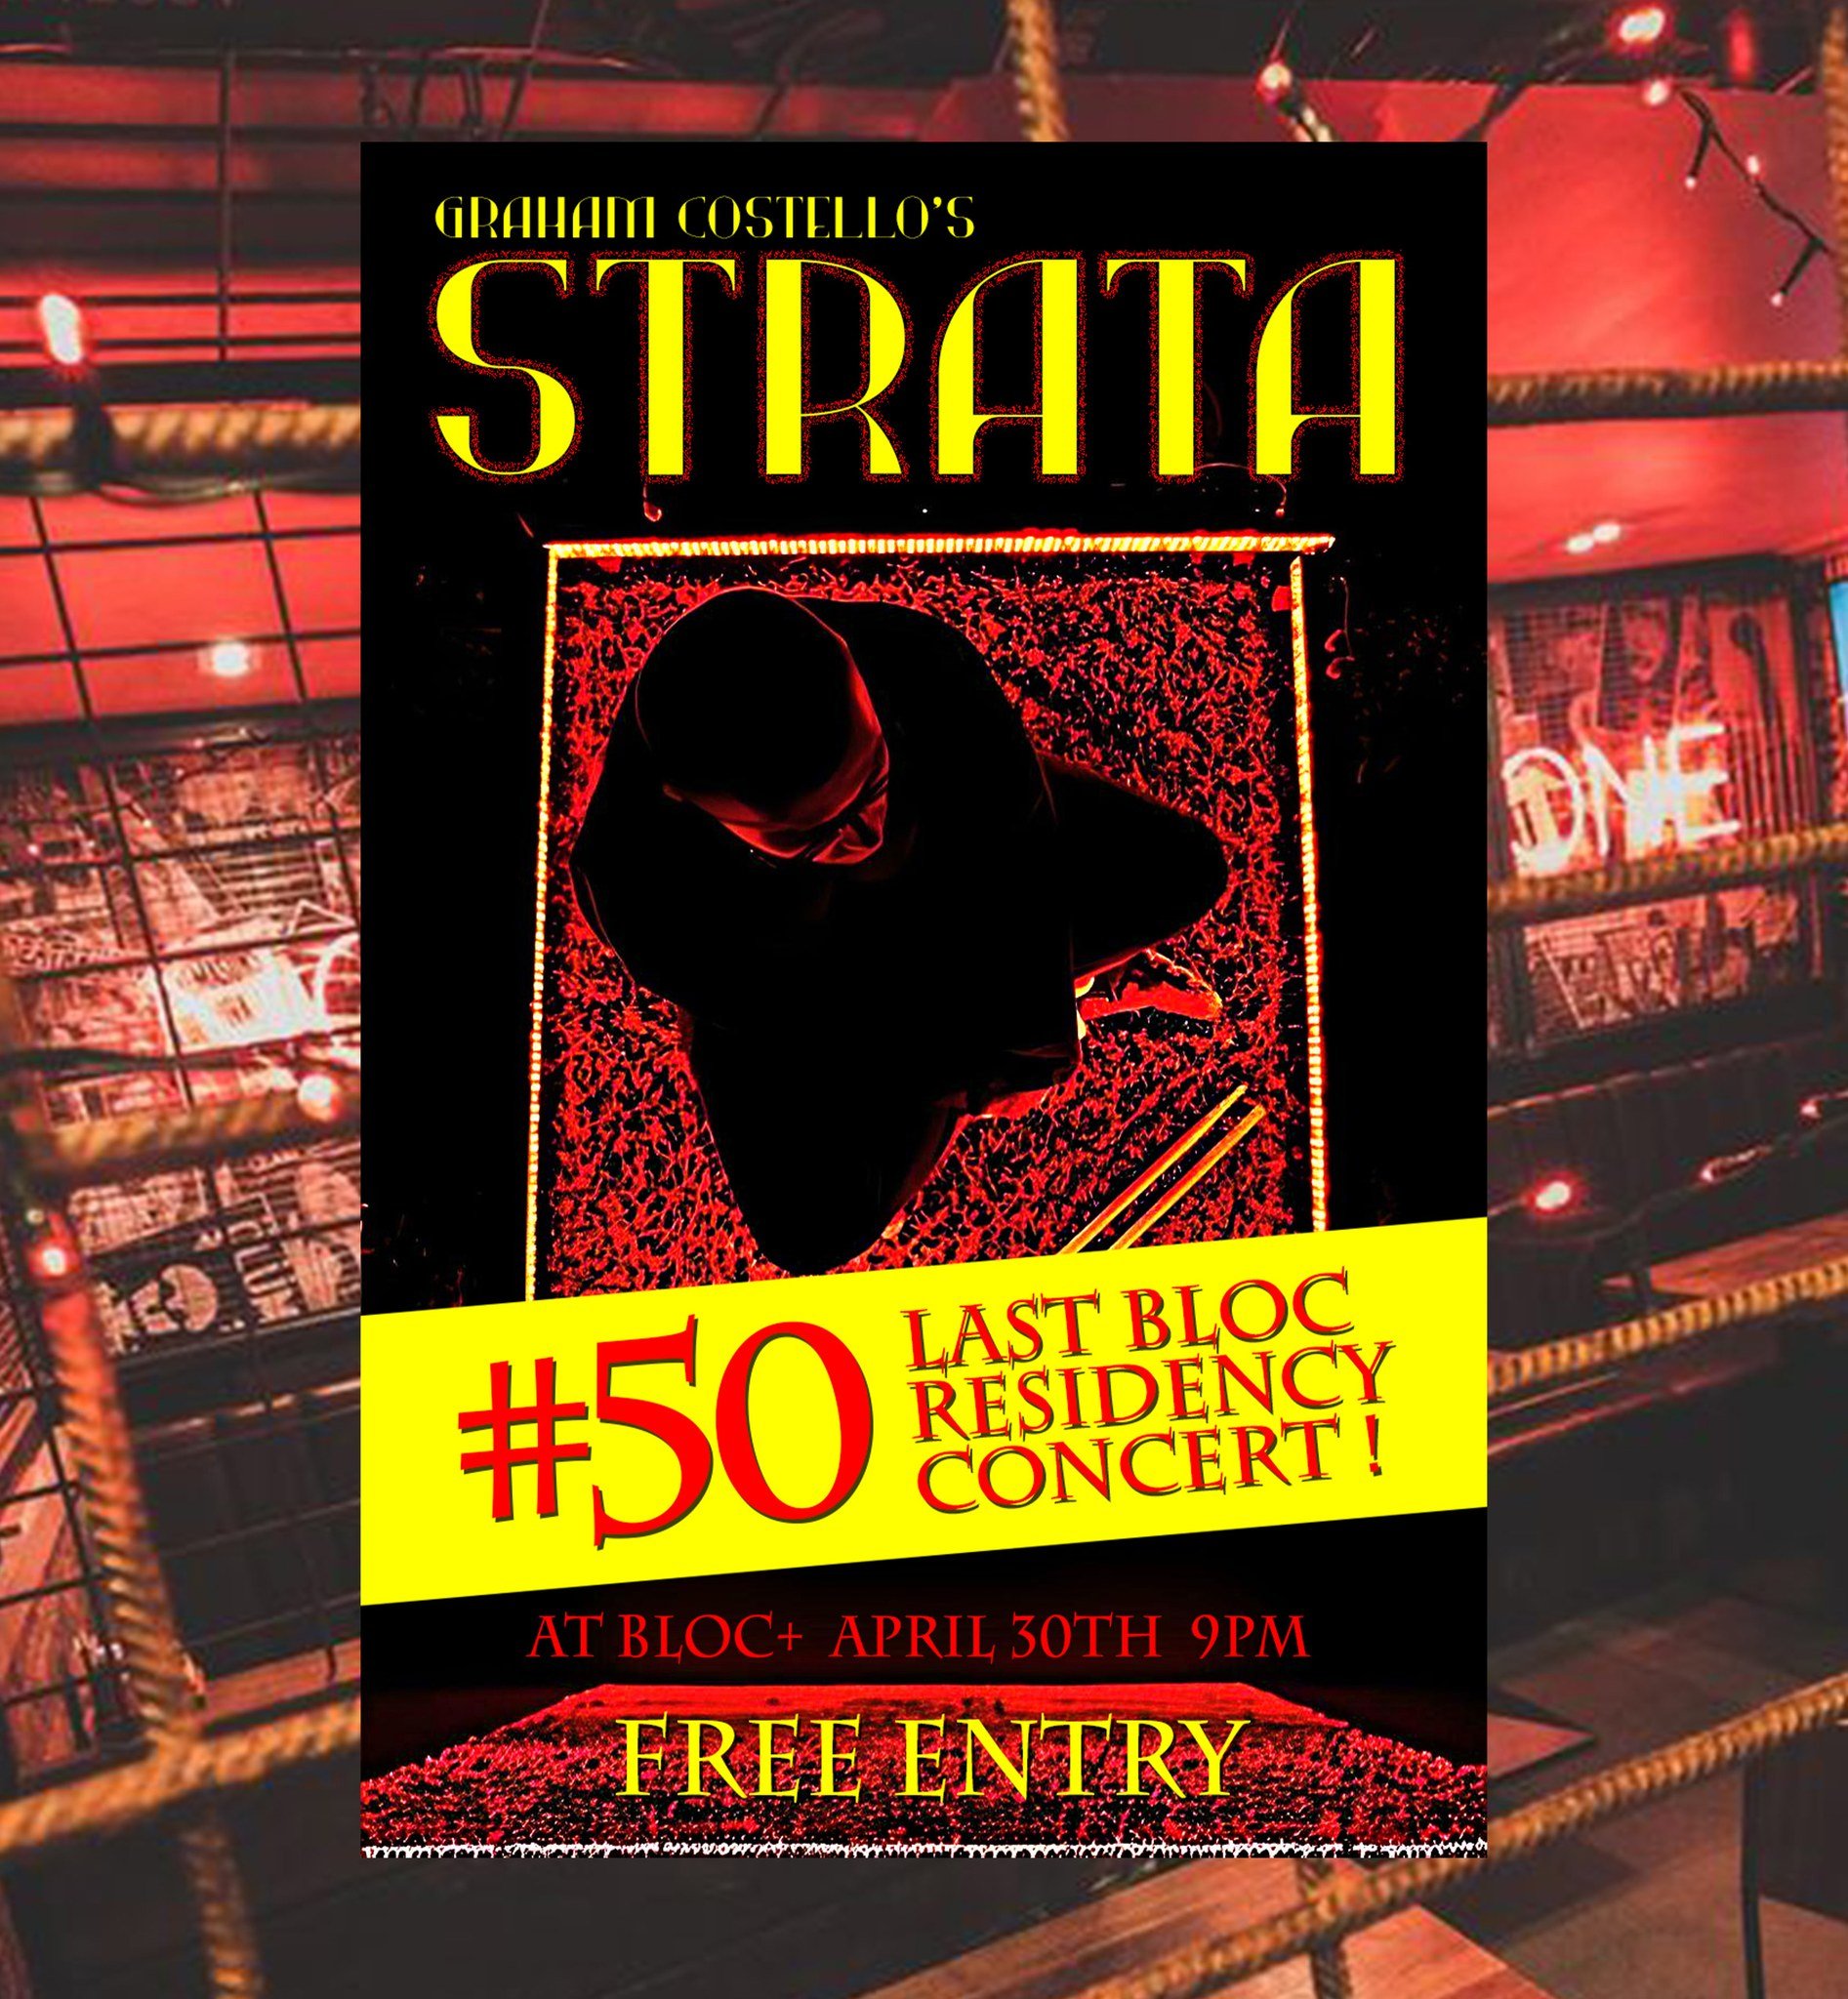 🔥 STRATA #50 IS ALMOST HERE 🔥

After 7 brilliant years, STRATA (led by @grahamcostellomusic) will celebrate their 50th and final residency at Bloc+ on Tuesday the 30th of April at 9pm 🎺🥁

Come down and experience some of the finest names in Glasg